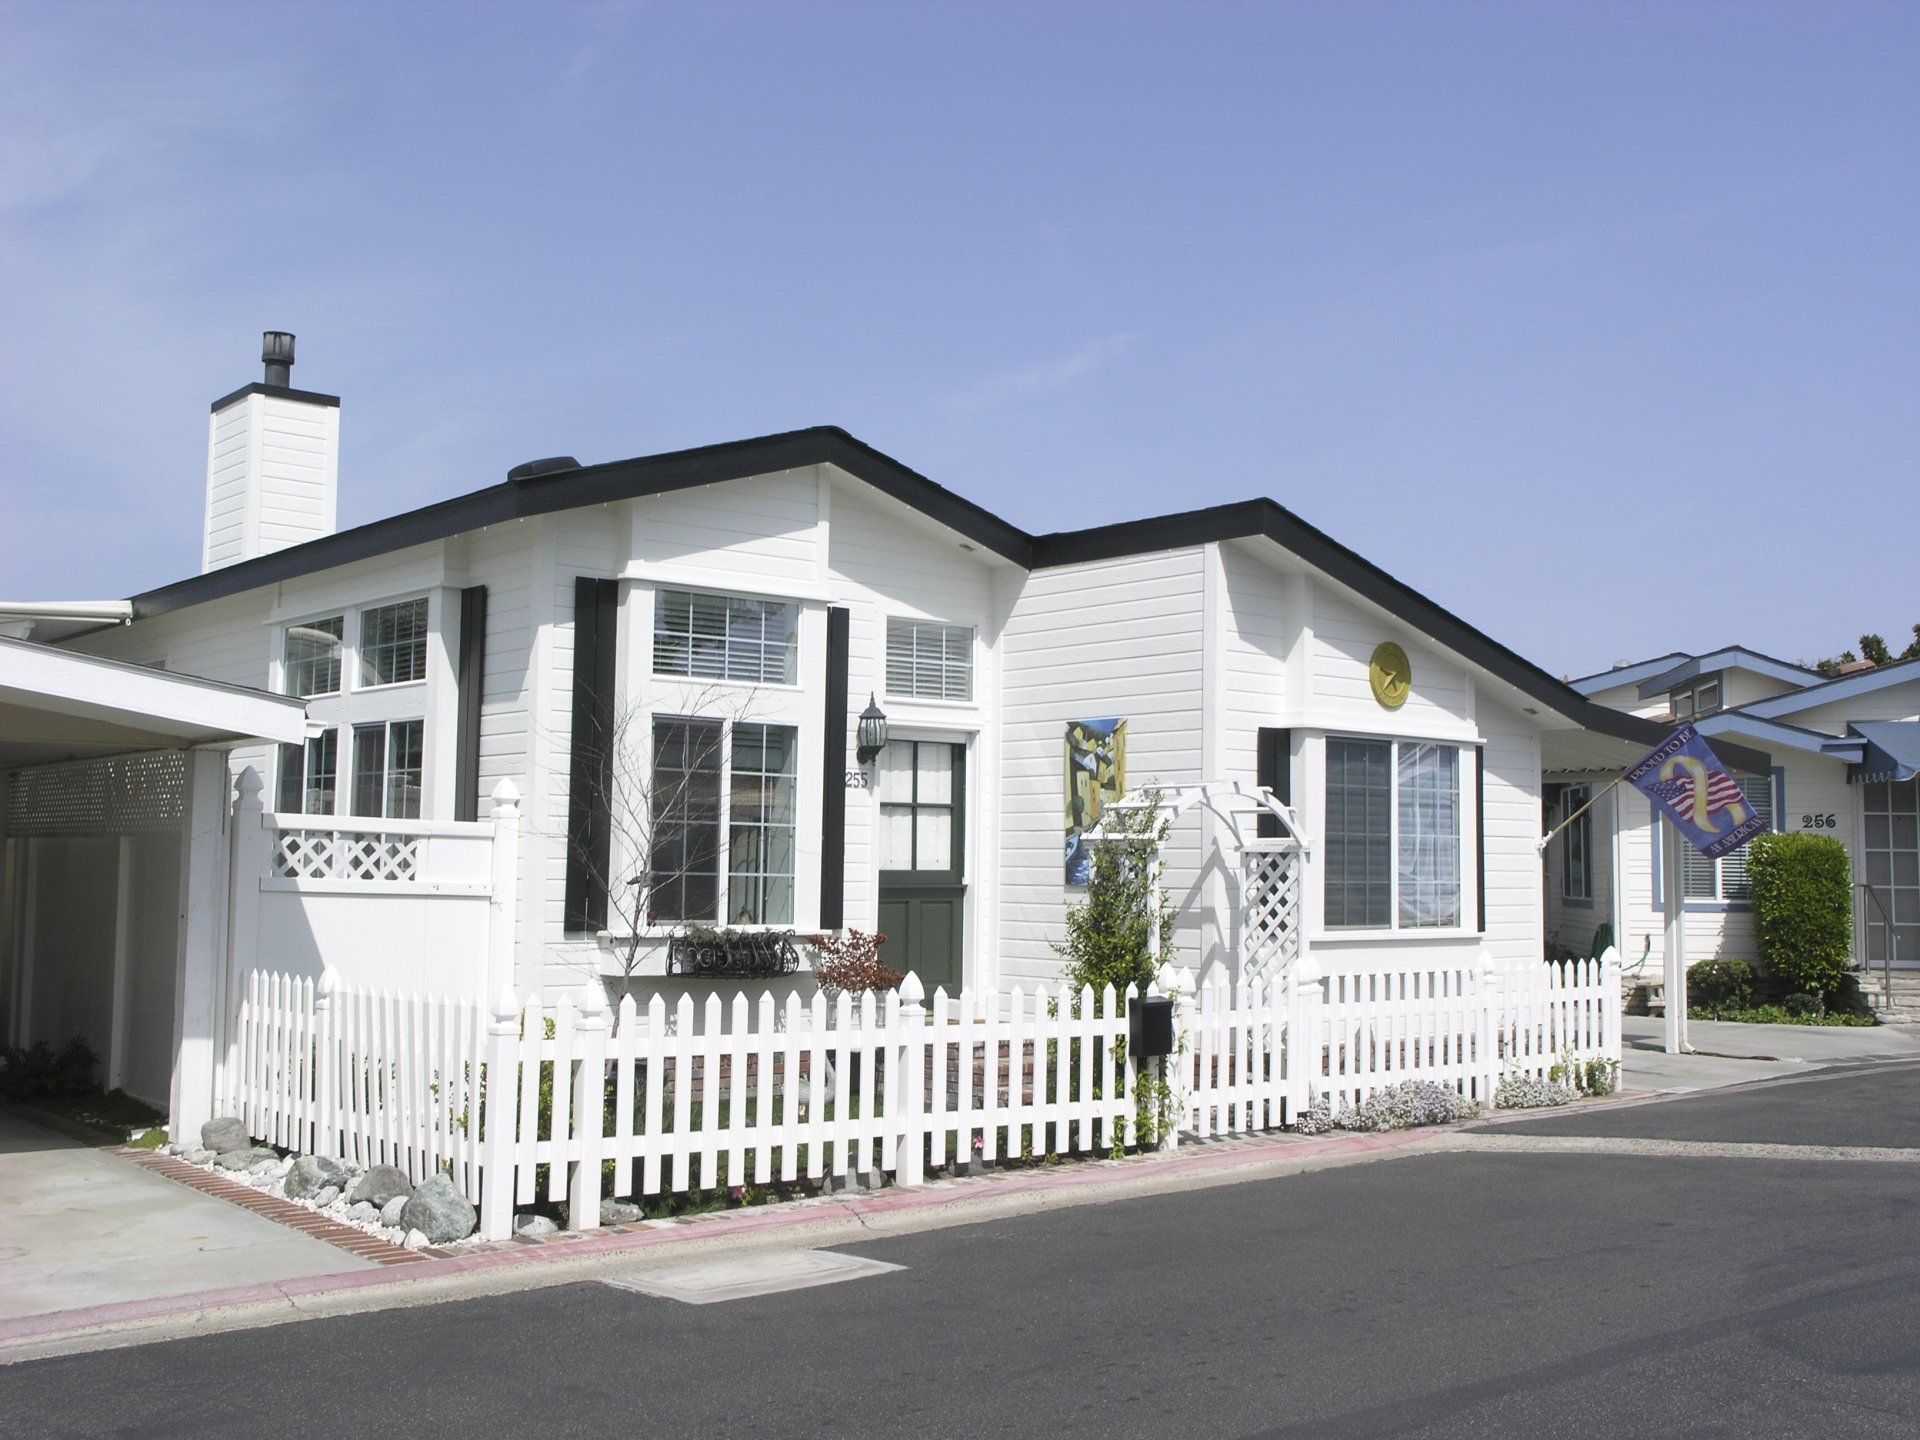 View of Bayside Village home with picket fence